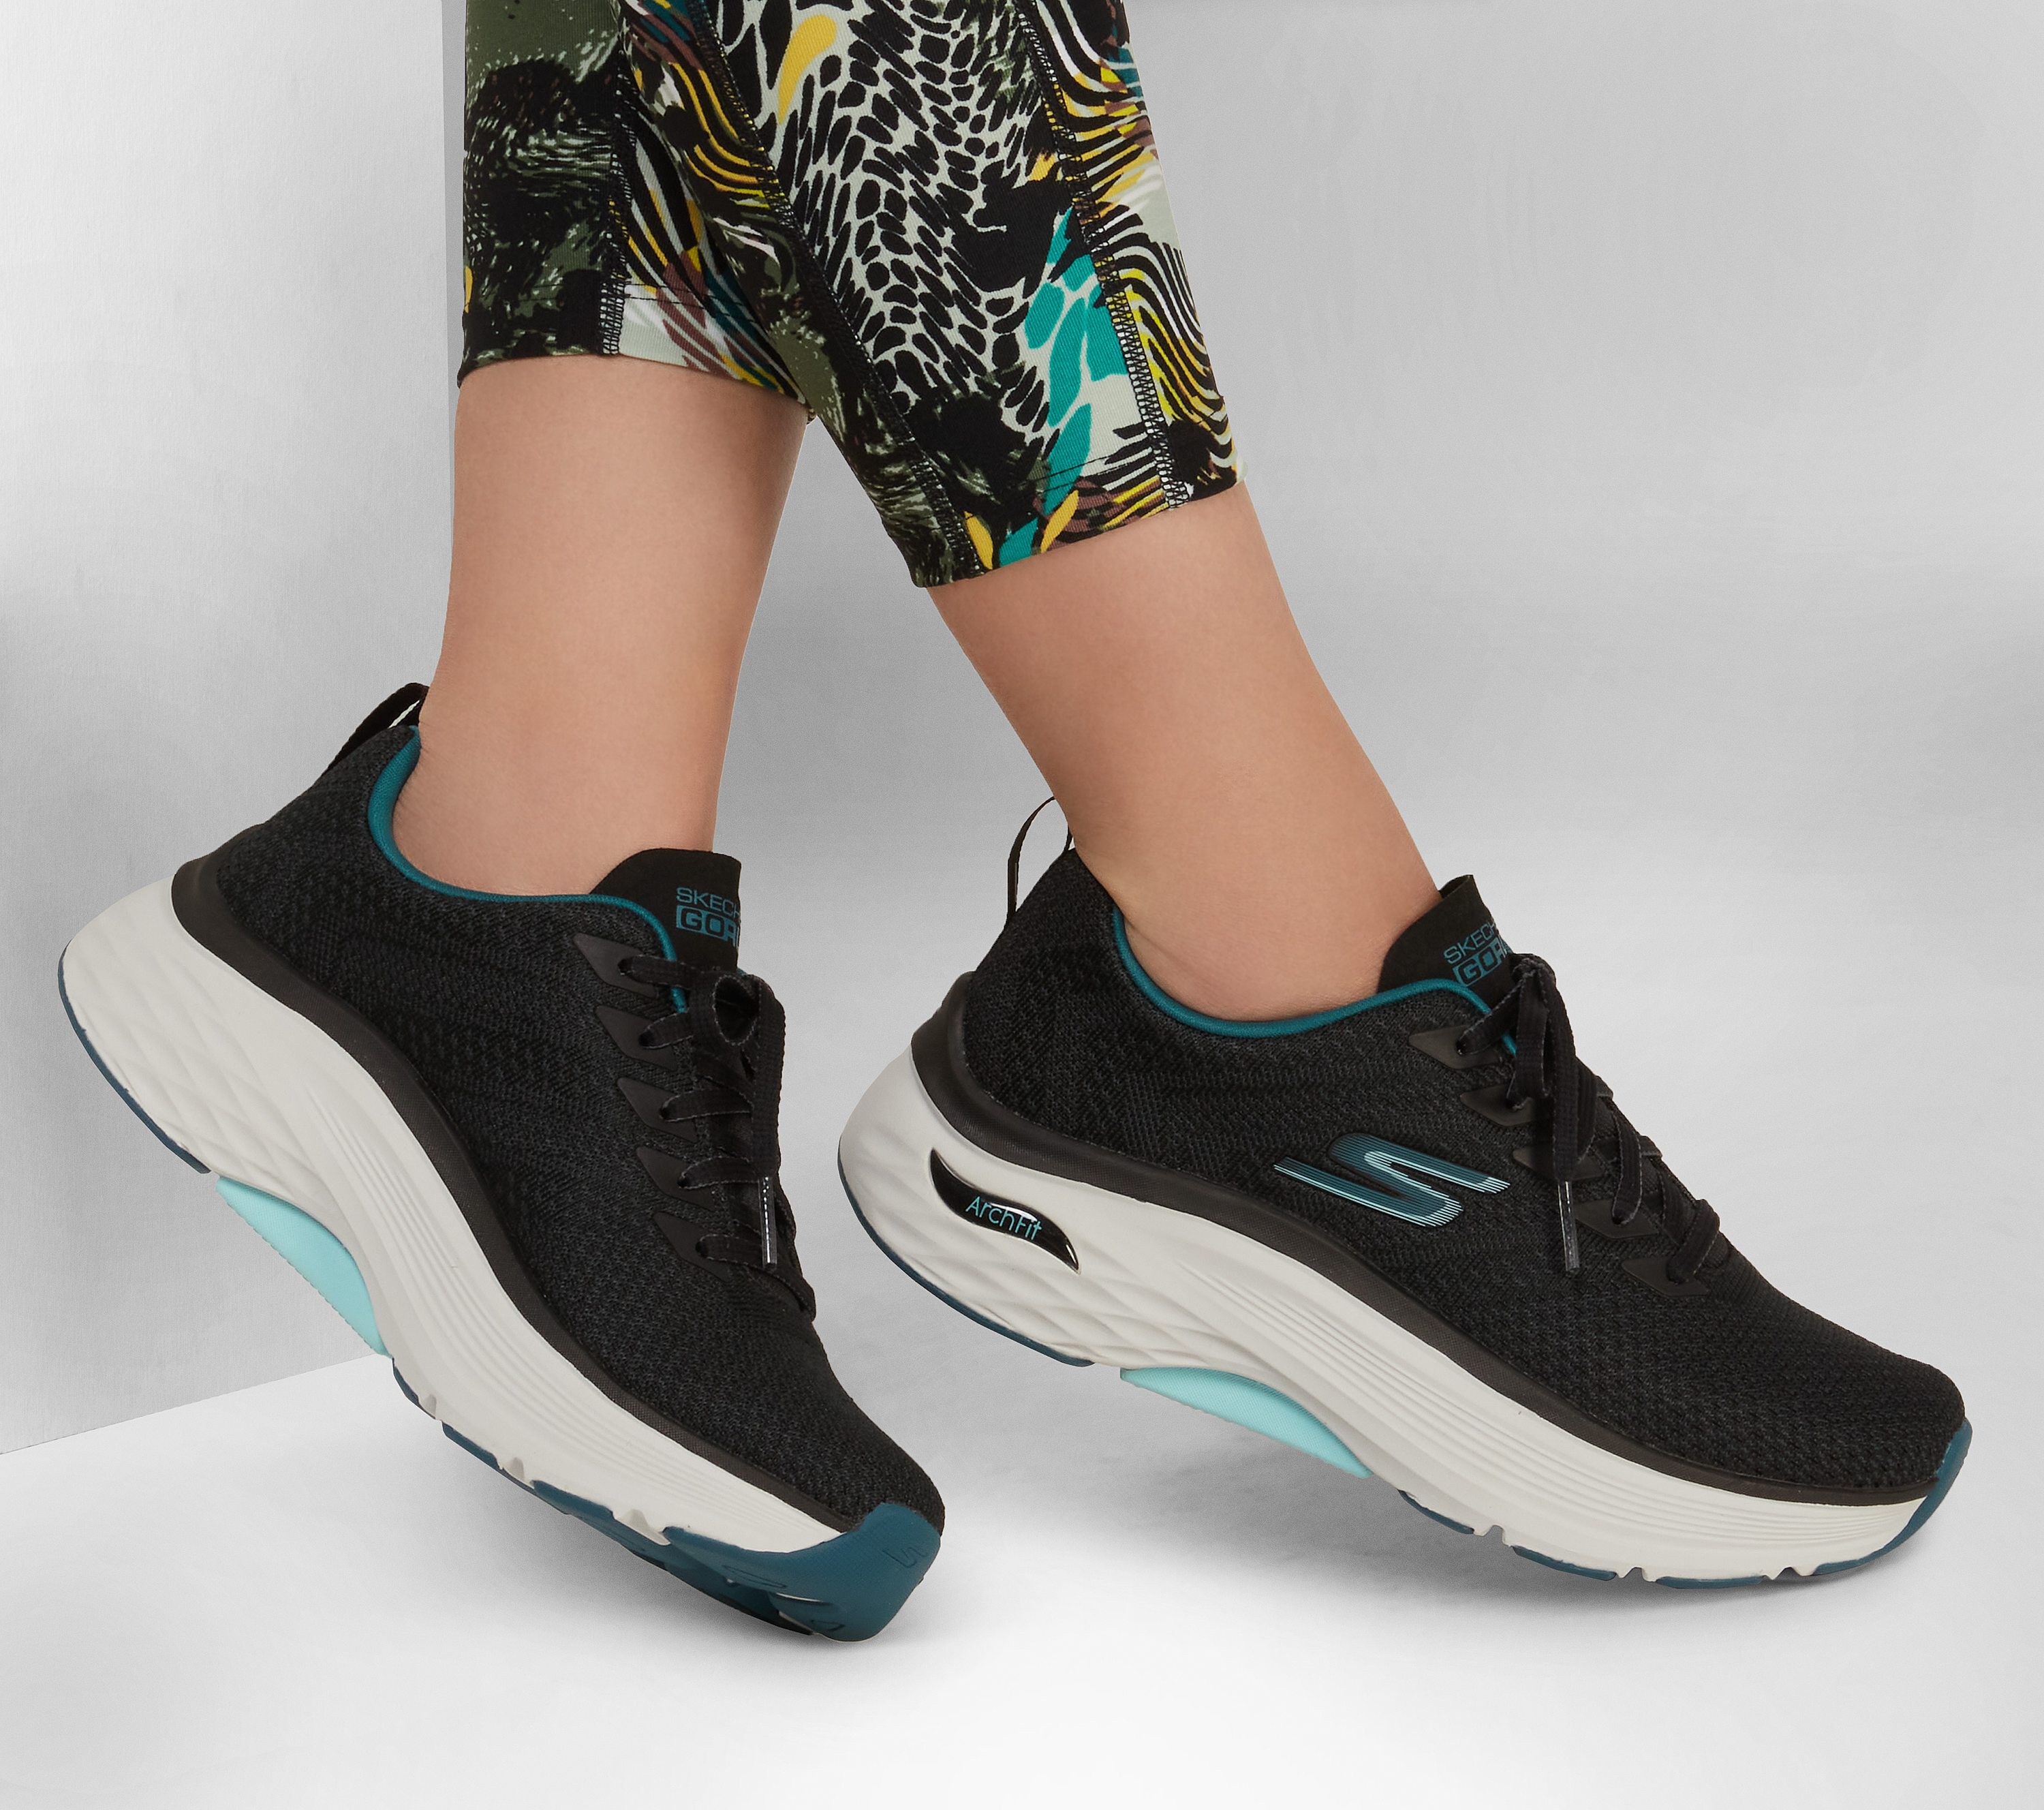 Shop the Skechers Max Cushioning Arch Fit | SKECHERS